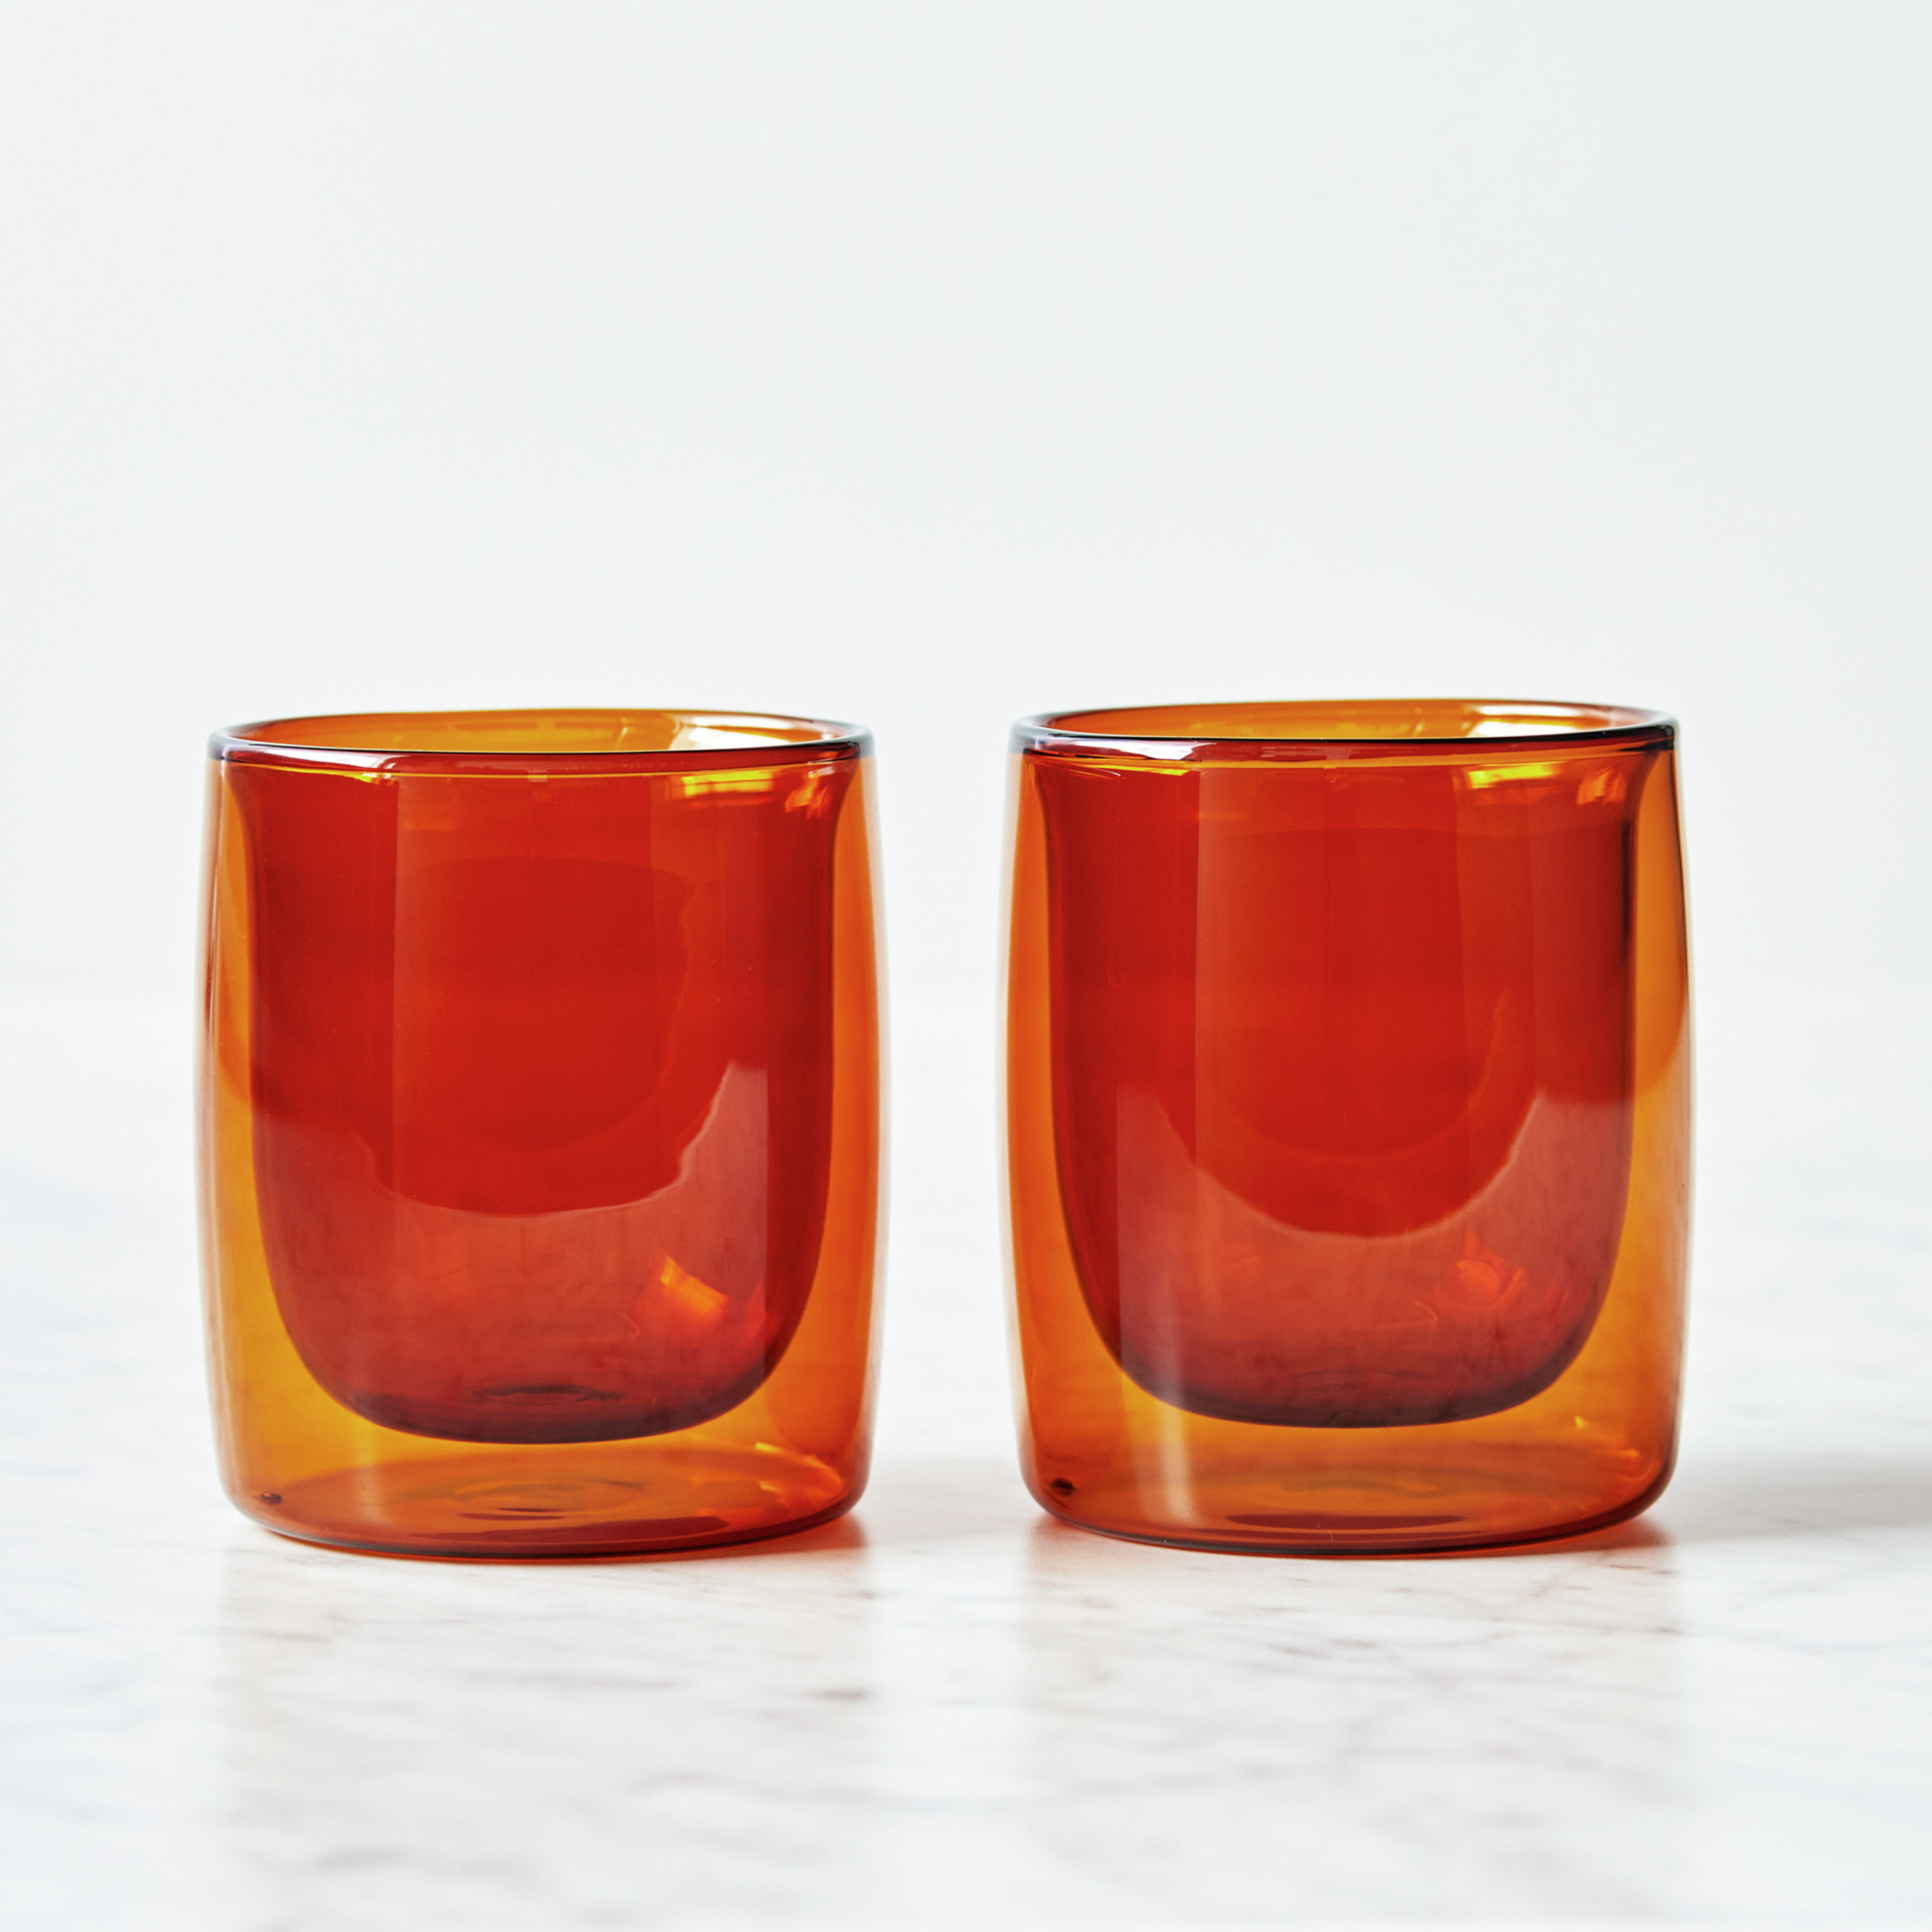 Yield 6 oz Double-Wall Glass, Boxed Set of 2 - Amber